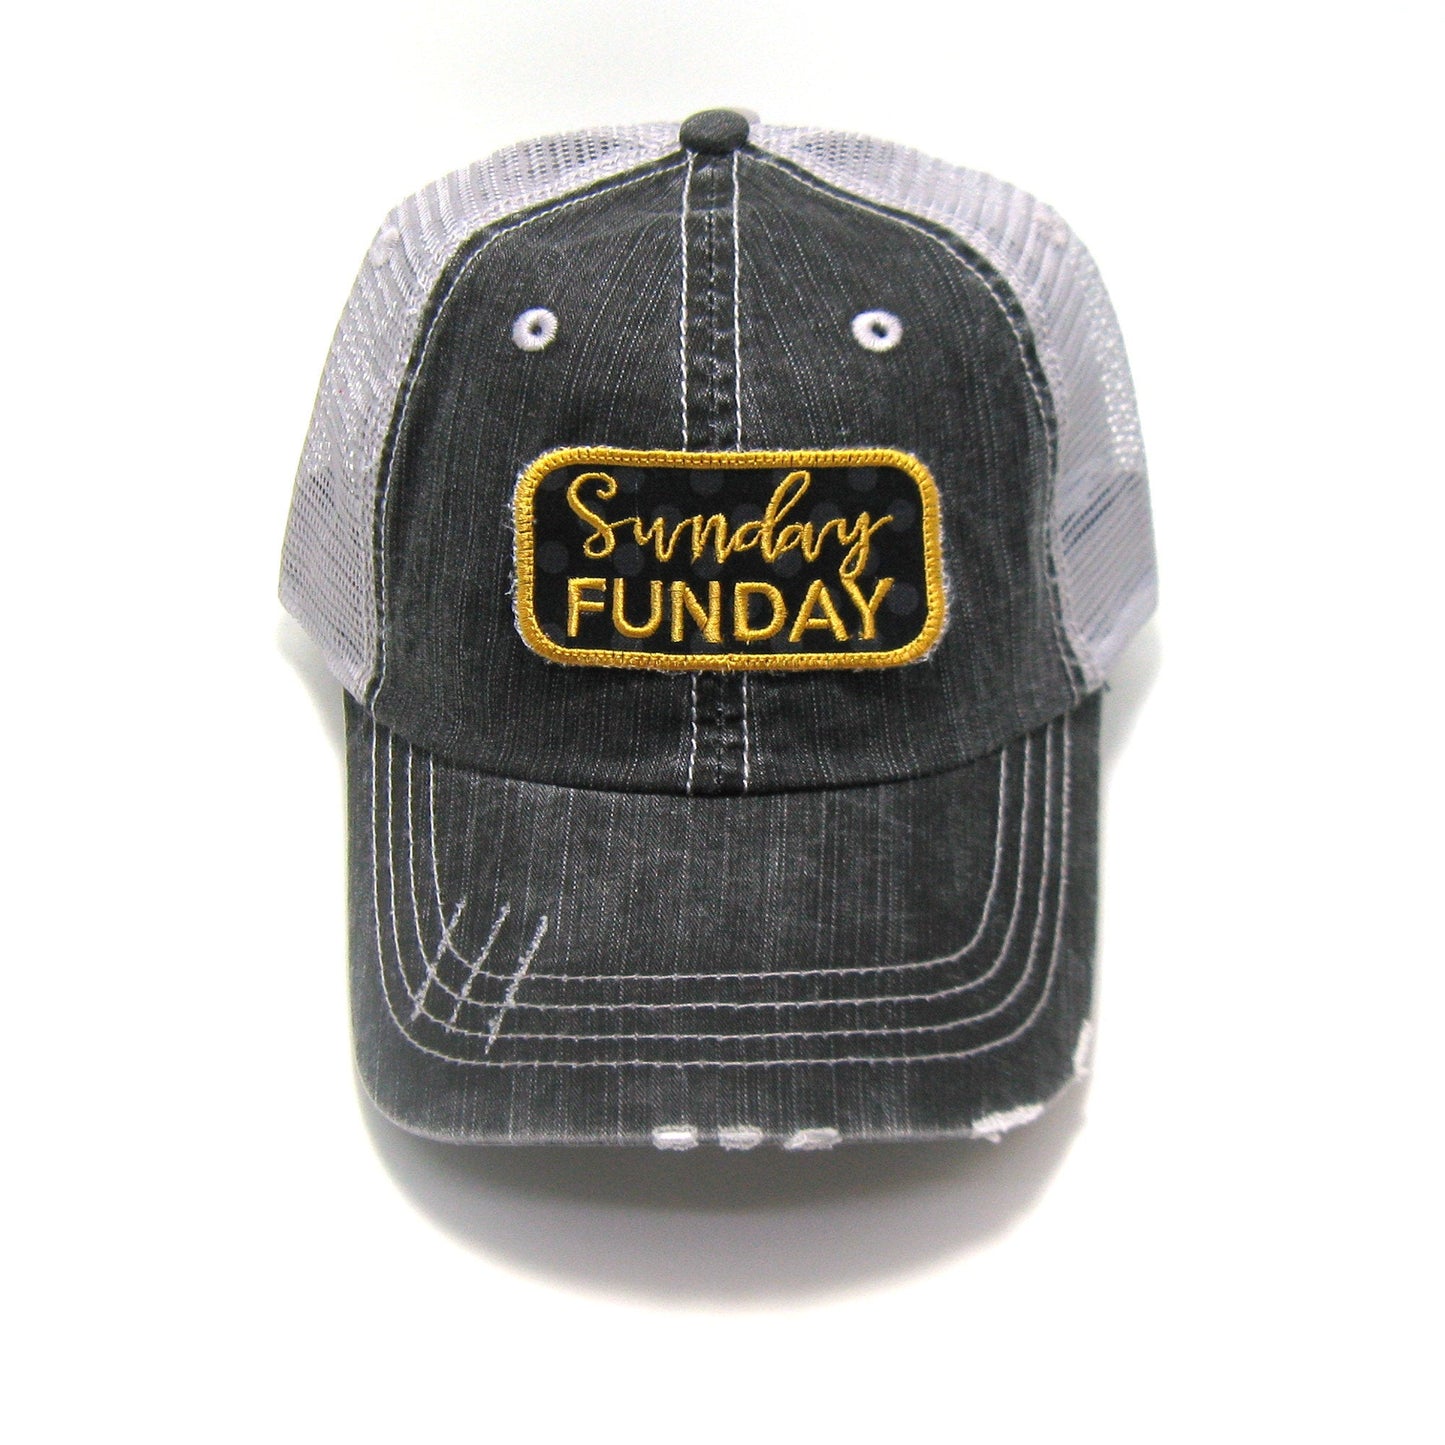 Sunday Funday Hat - Gray Distressed Trucker Hat